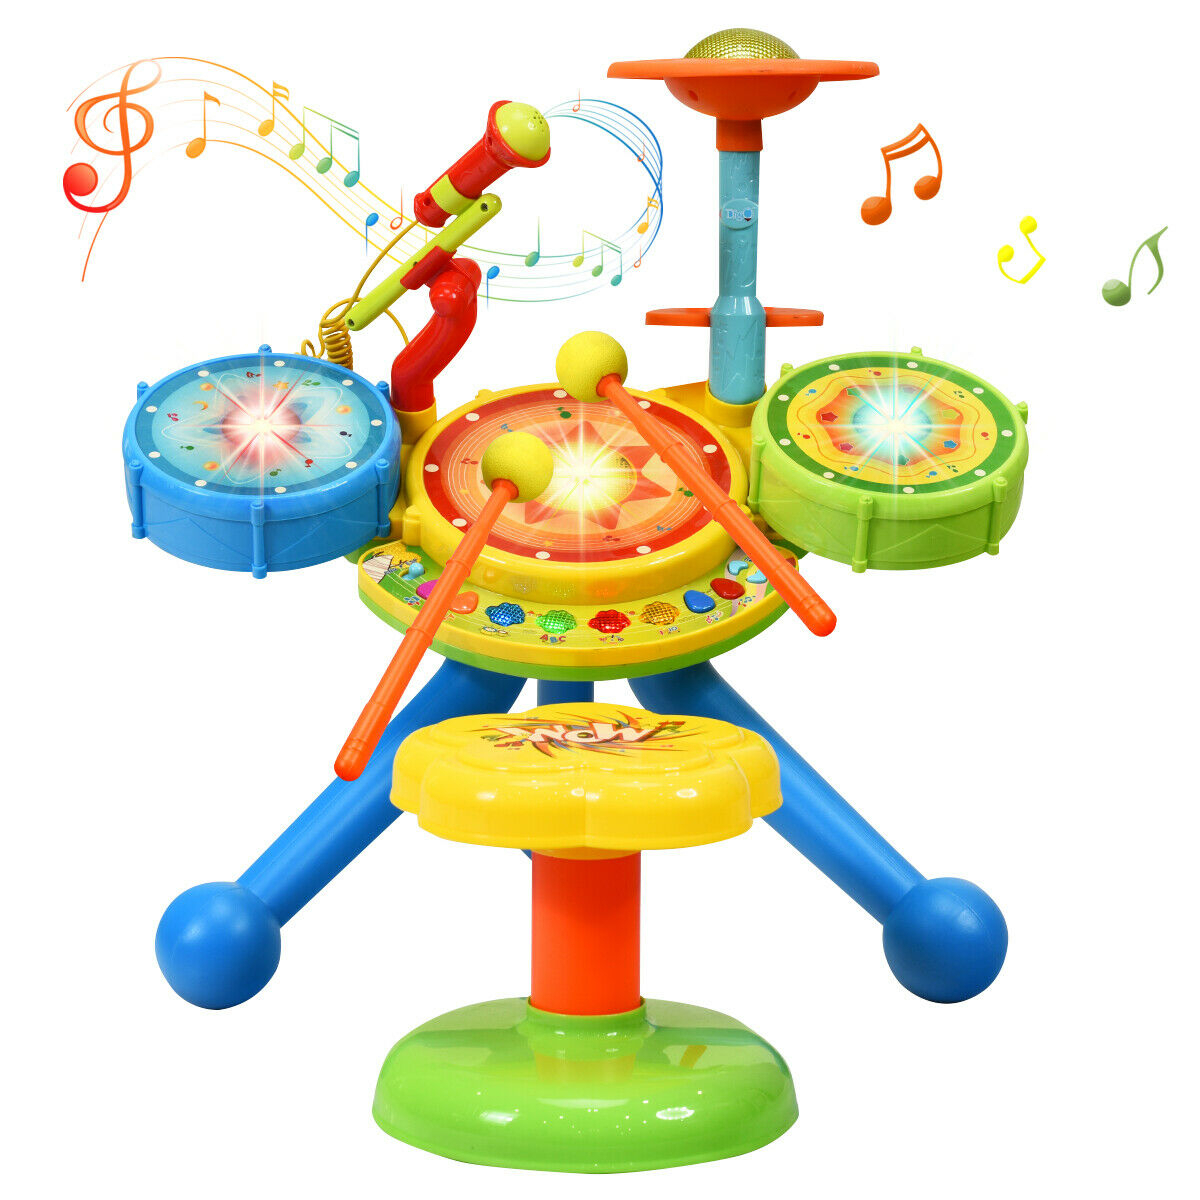 Kids Electric Jazz Drum Set Musical Instrument With Stool Microphone & LED Light